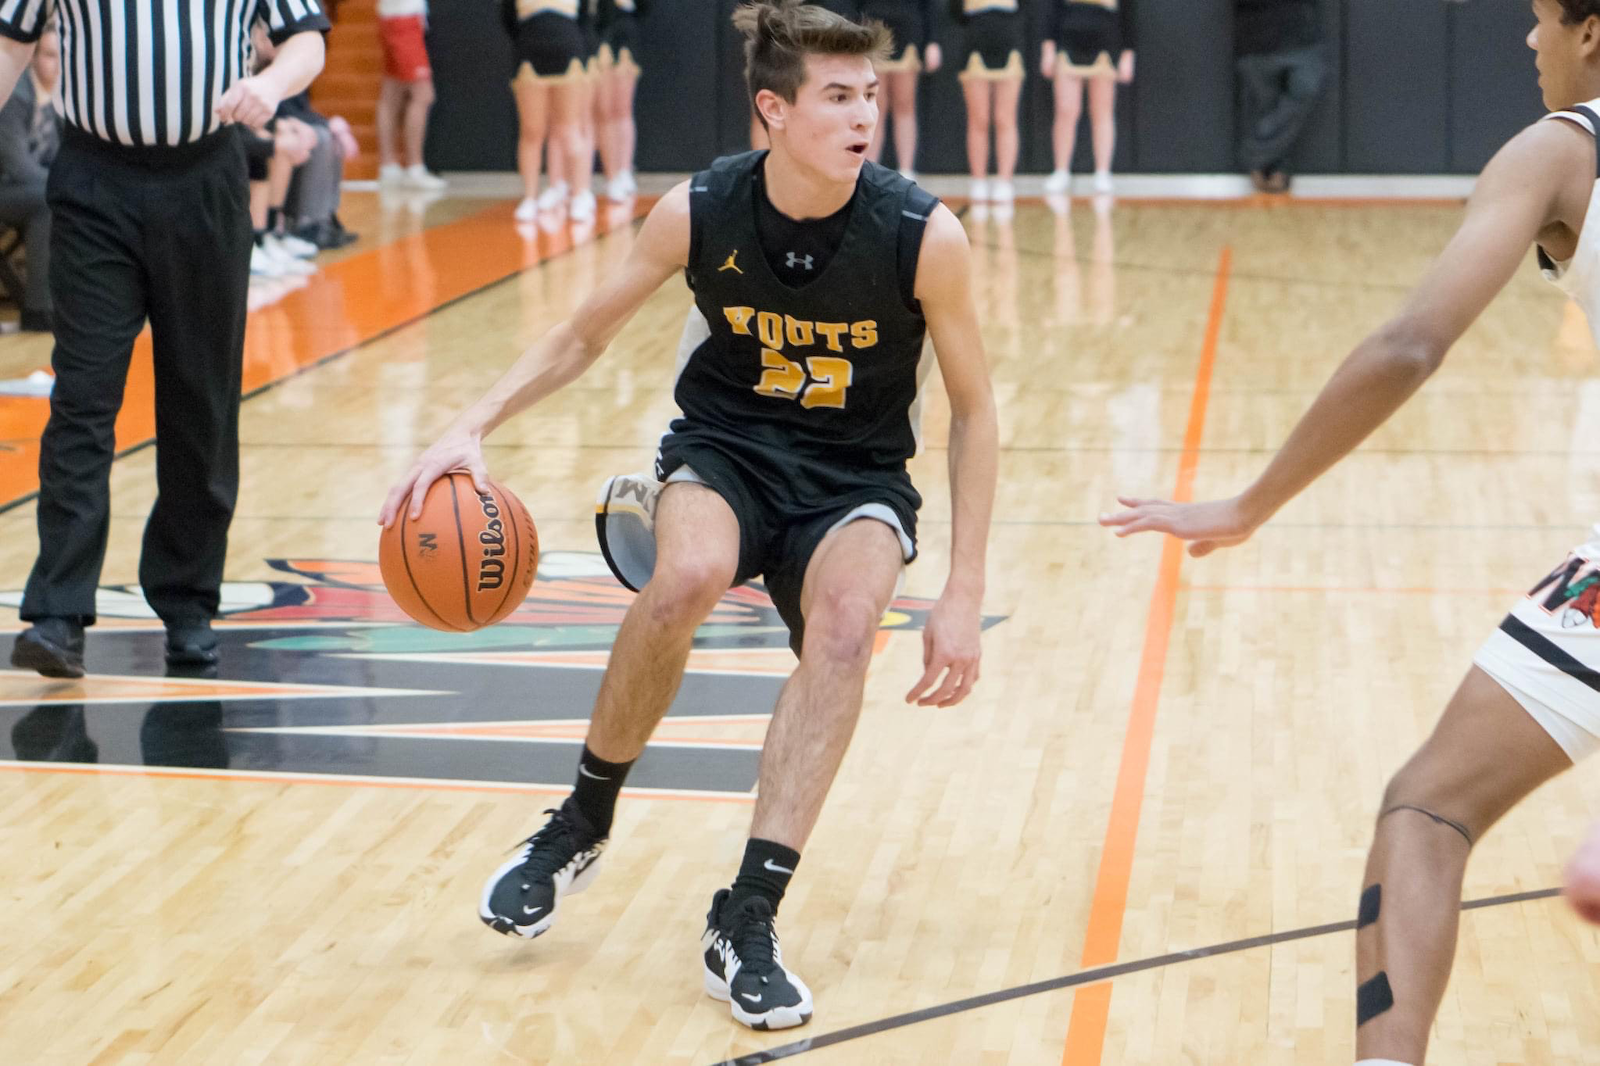 Ketchmark named honorable mention All-State by the IBCA cover photo